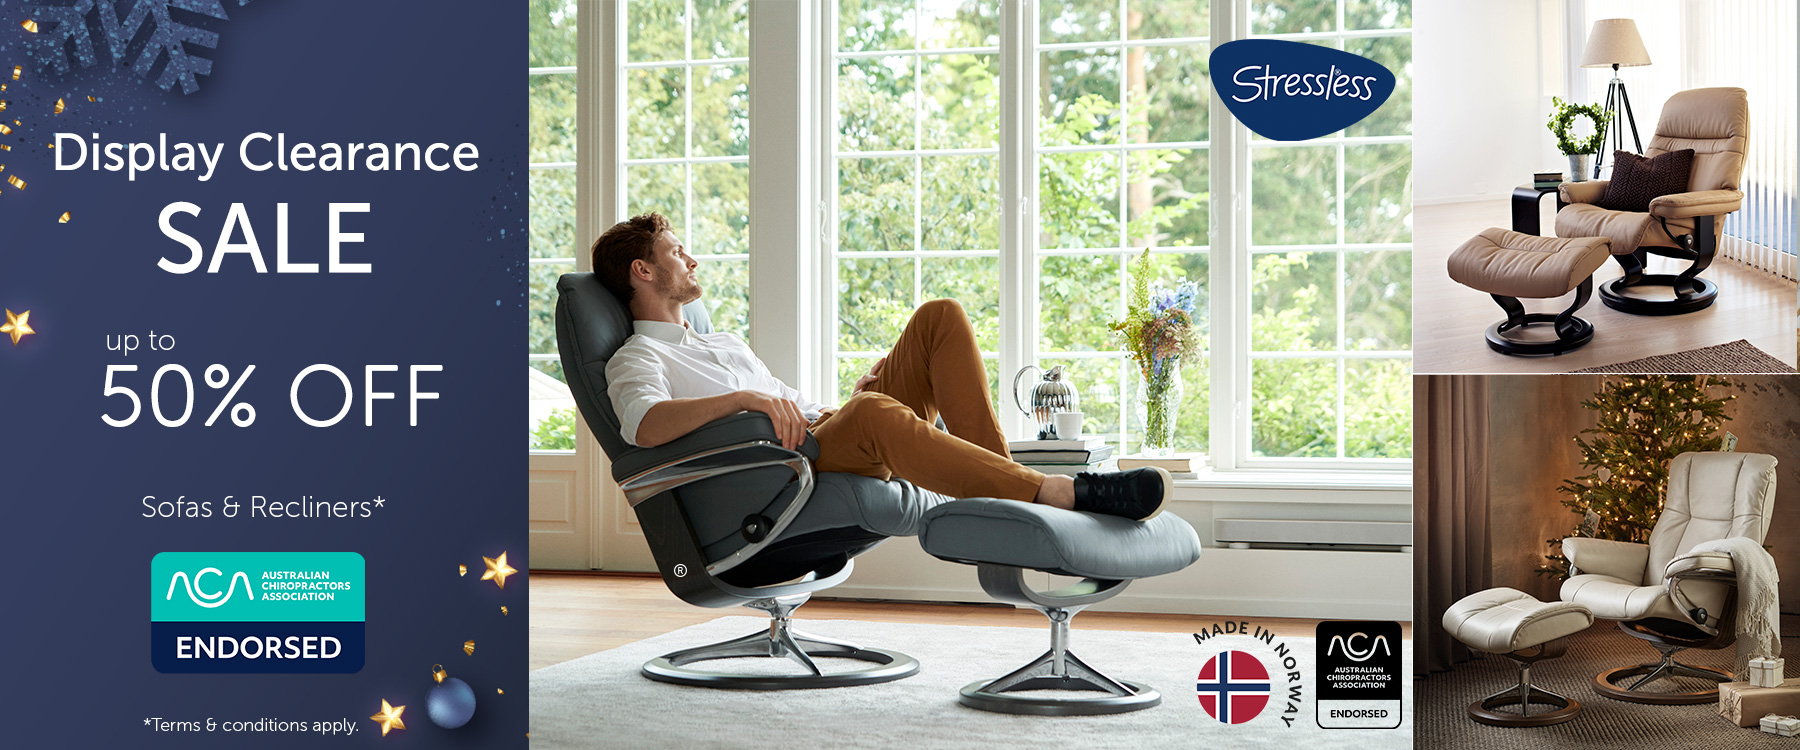 Stressless Recliners Sale